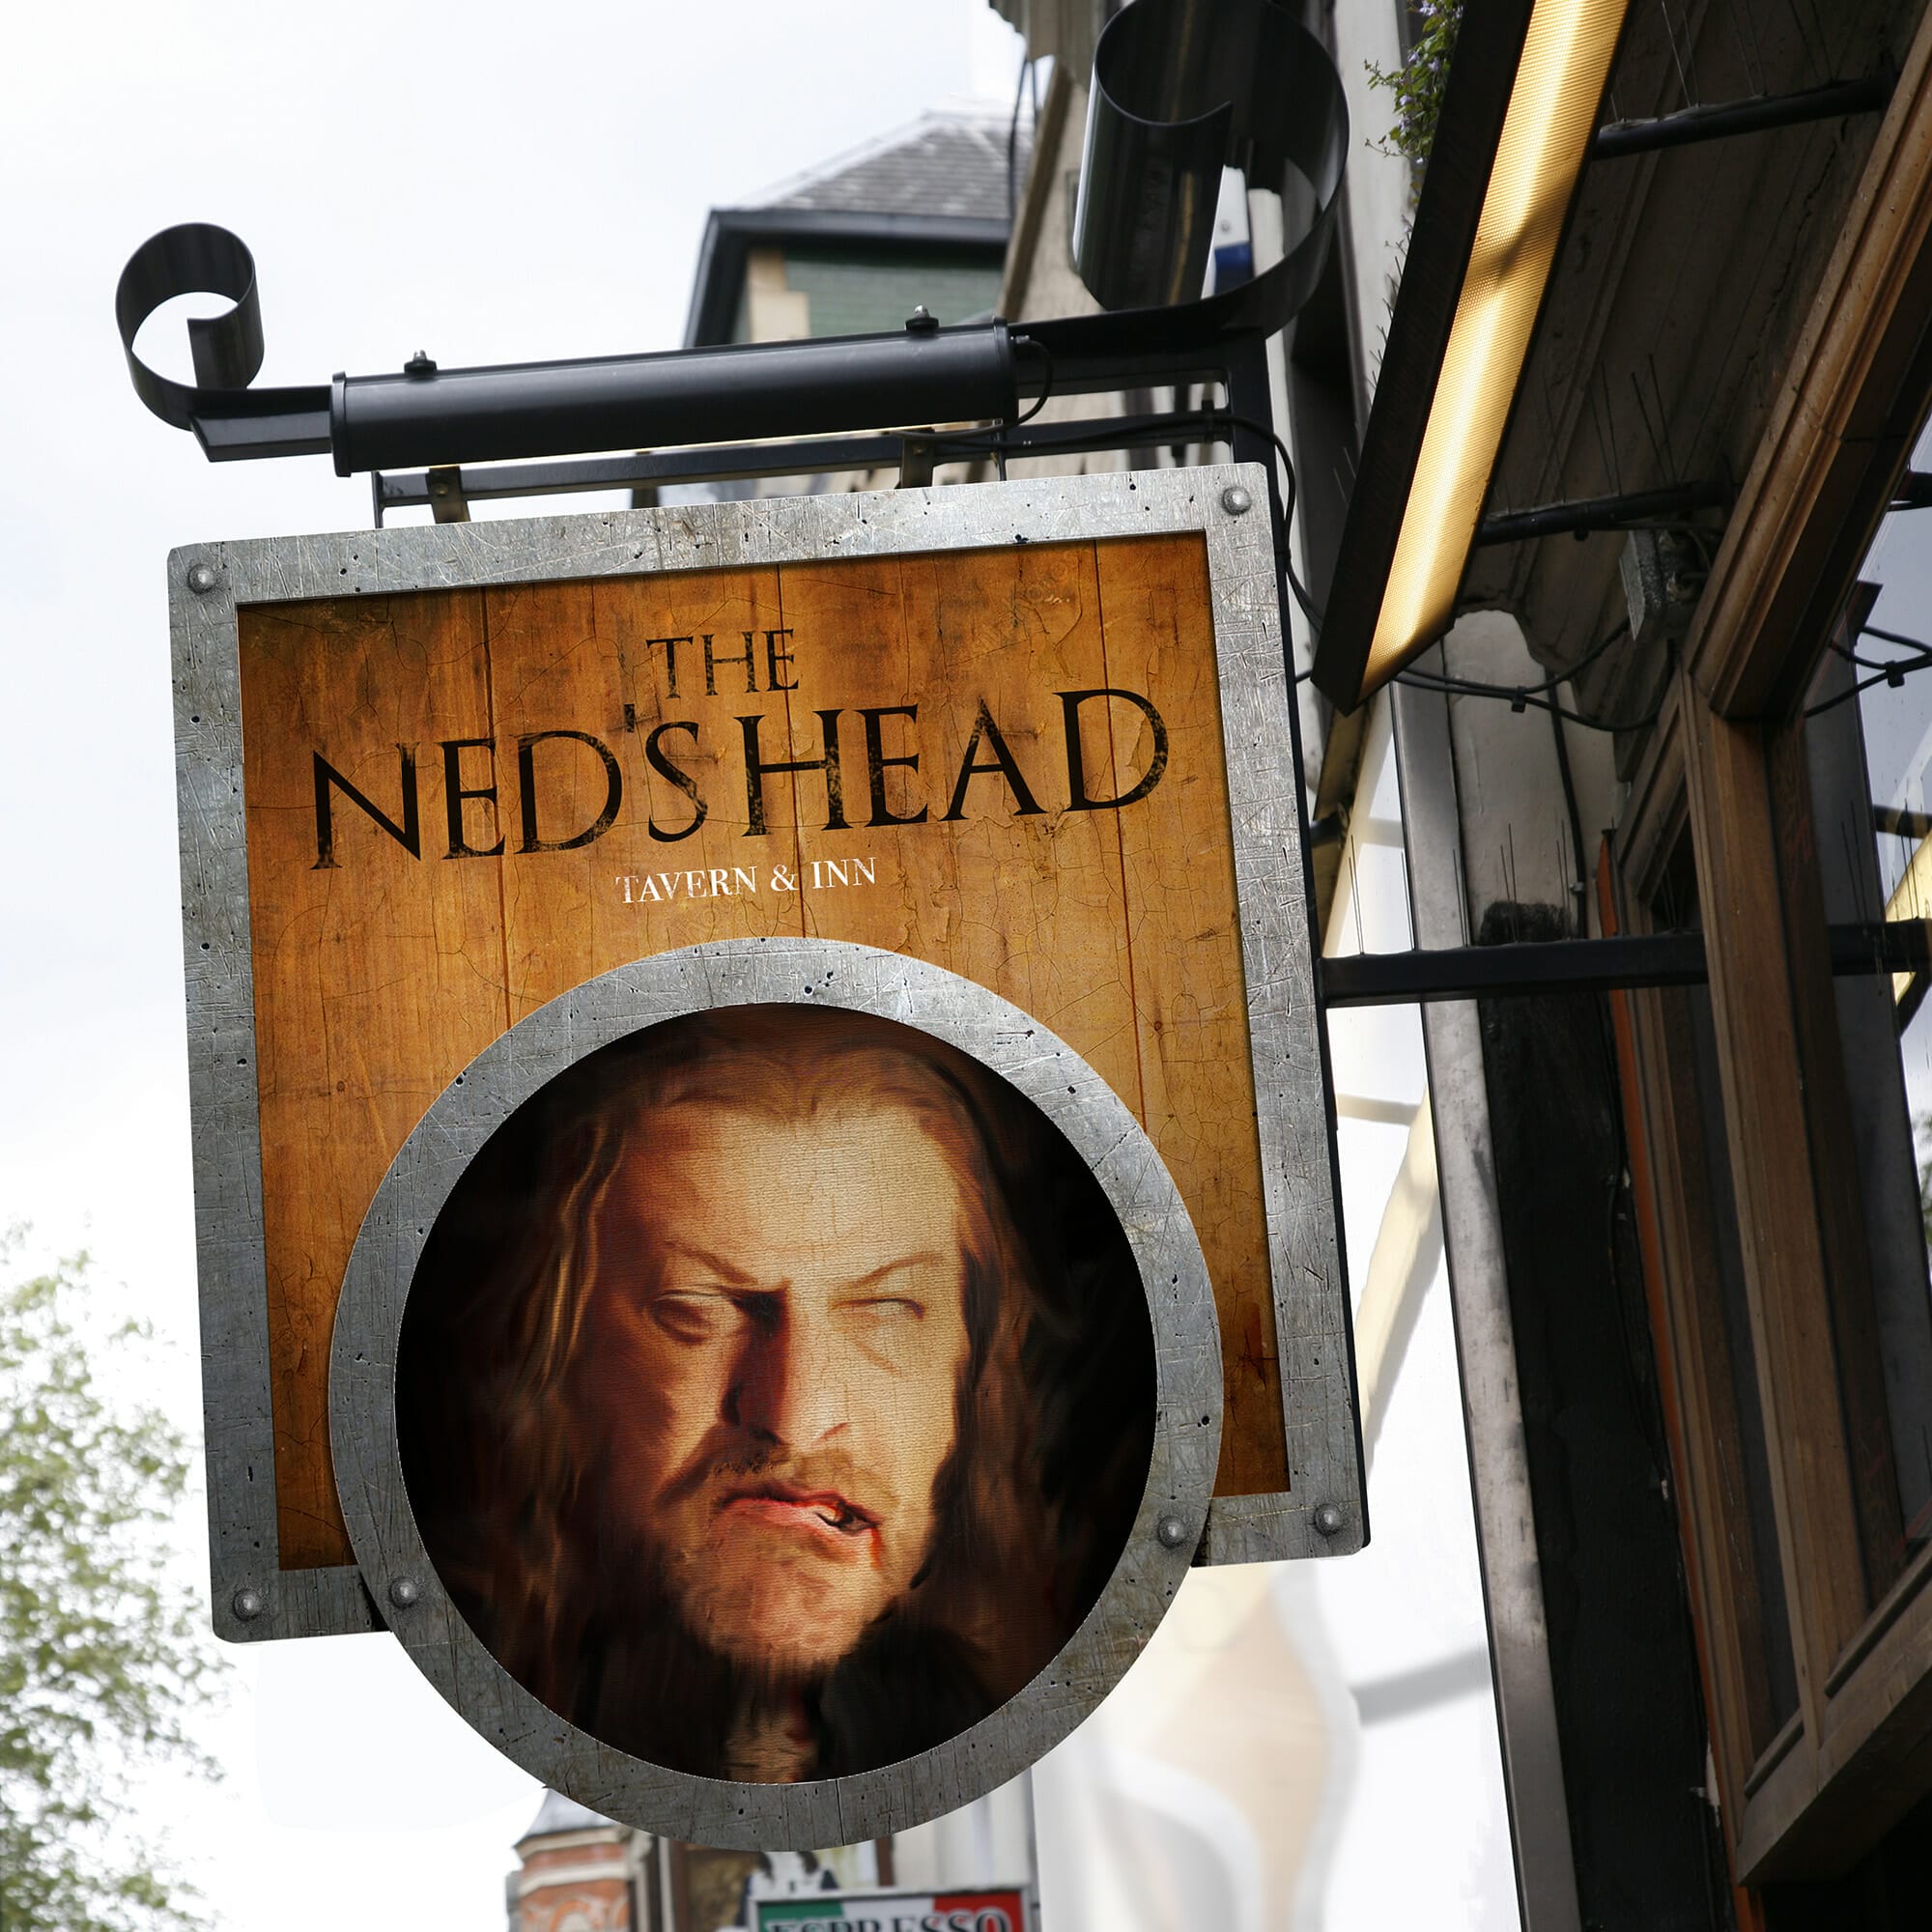 The Ned's Head